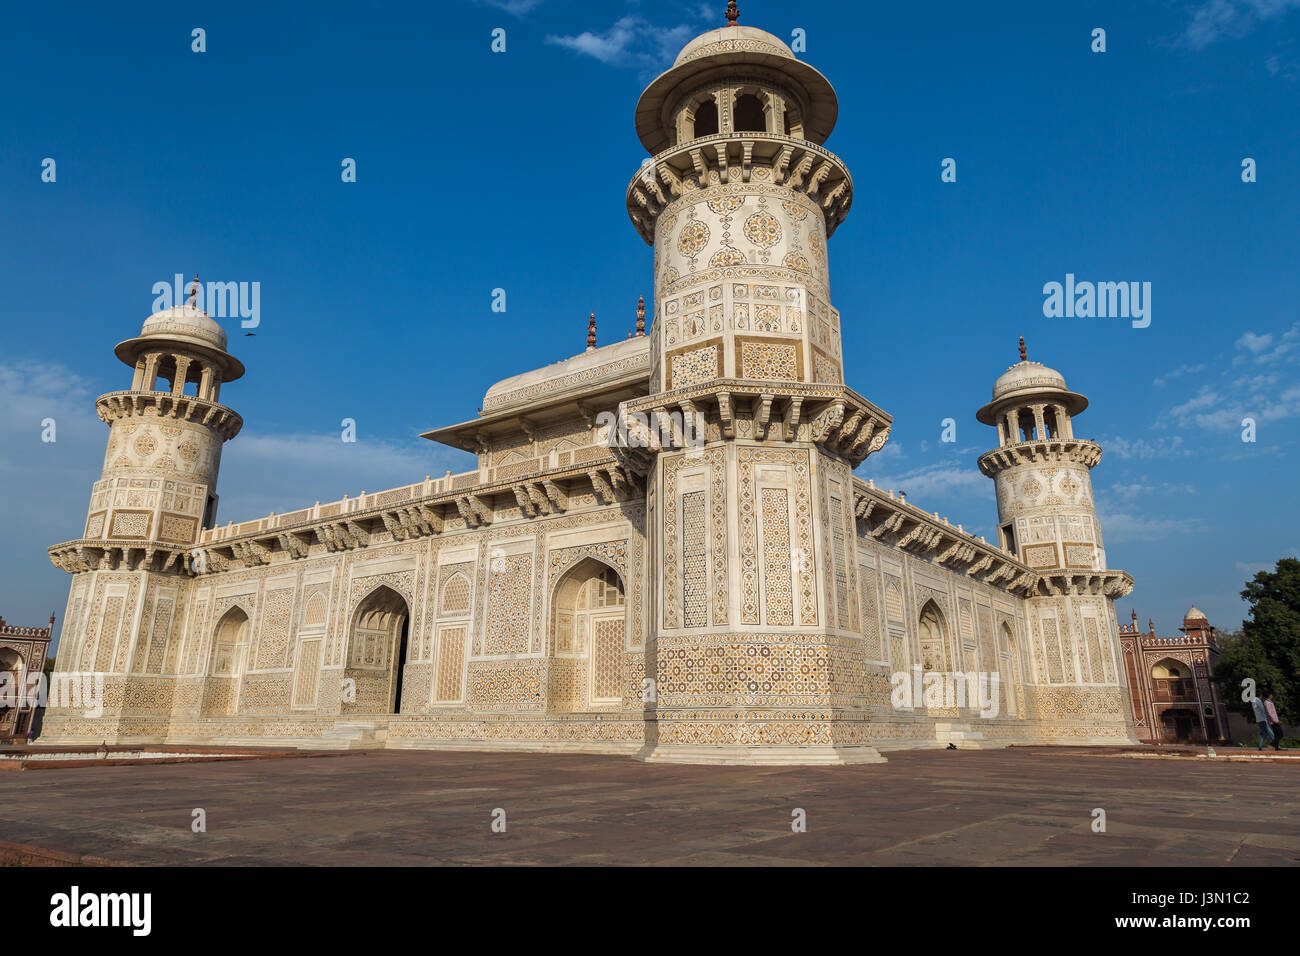 Tomb of Itimad-ud-Daulah also known as the Baby Taj in Agra is a white marble mausoleum with intricate carvings on the exterior and interior. Stock Photo